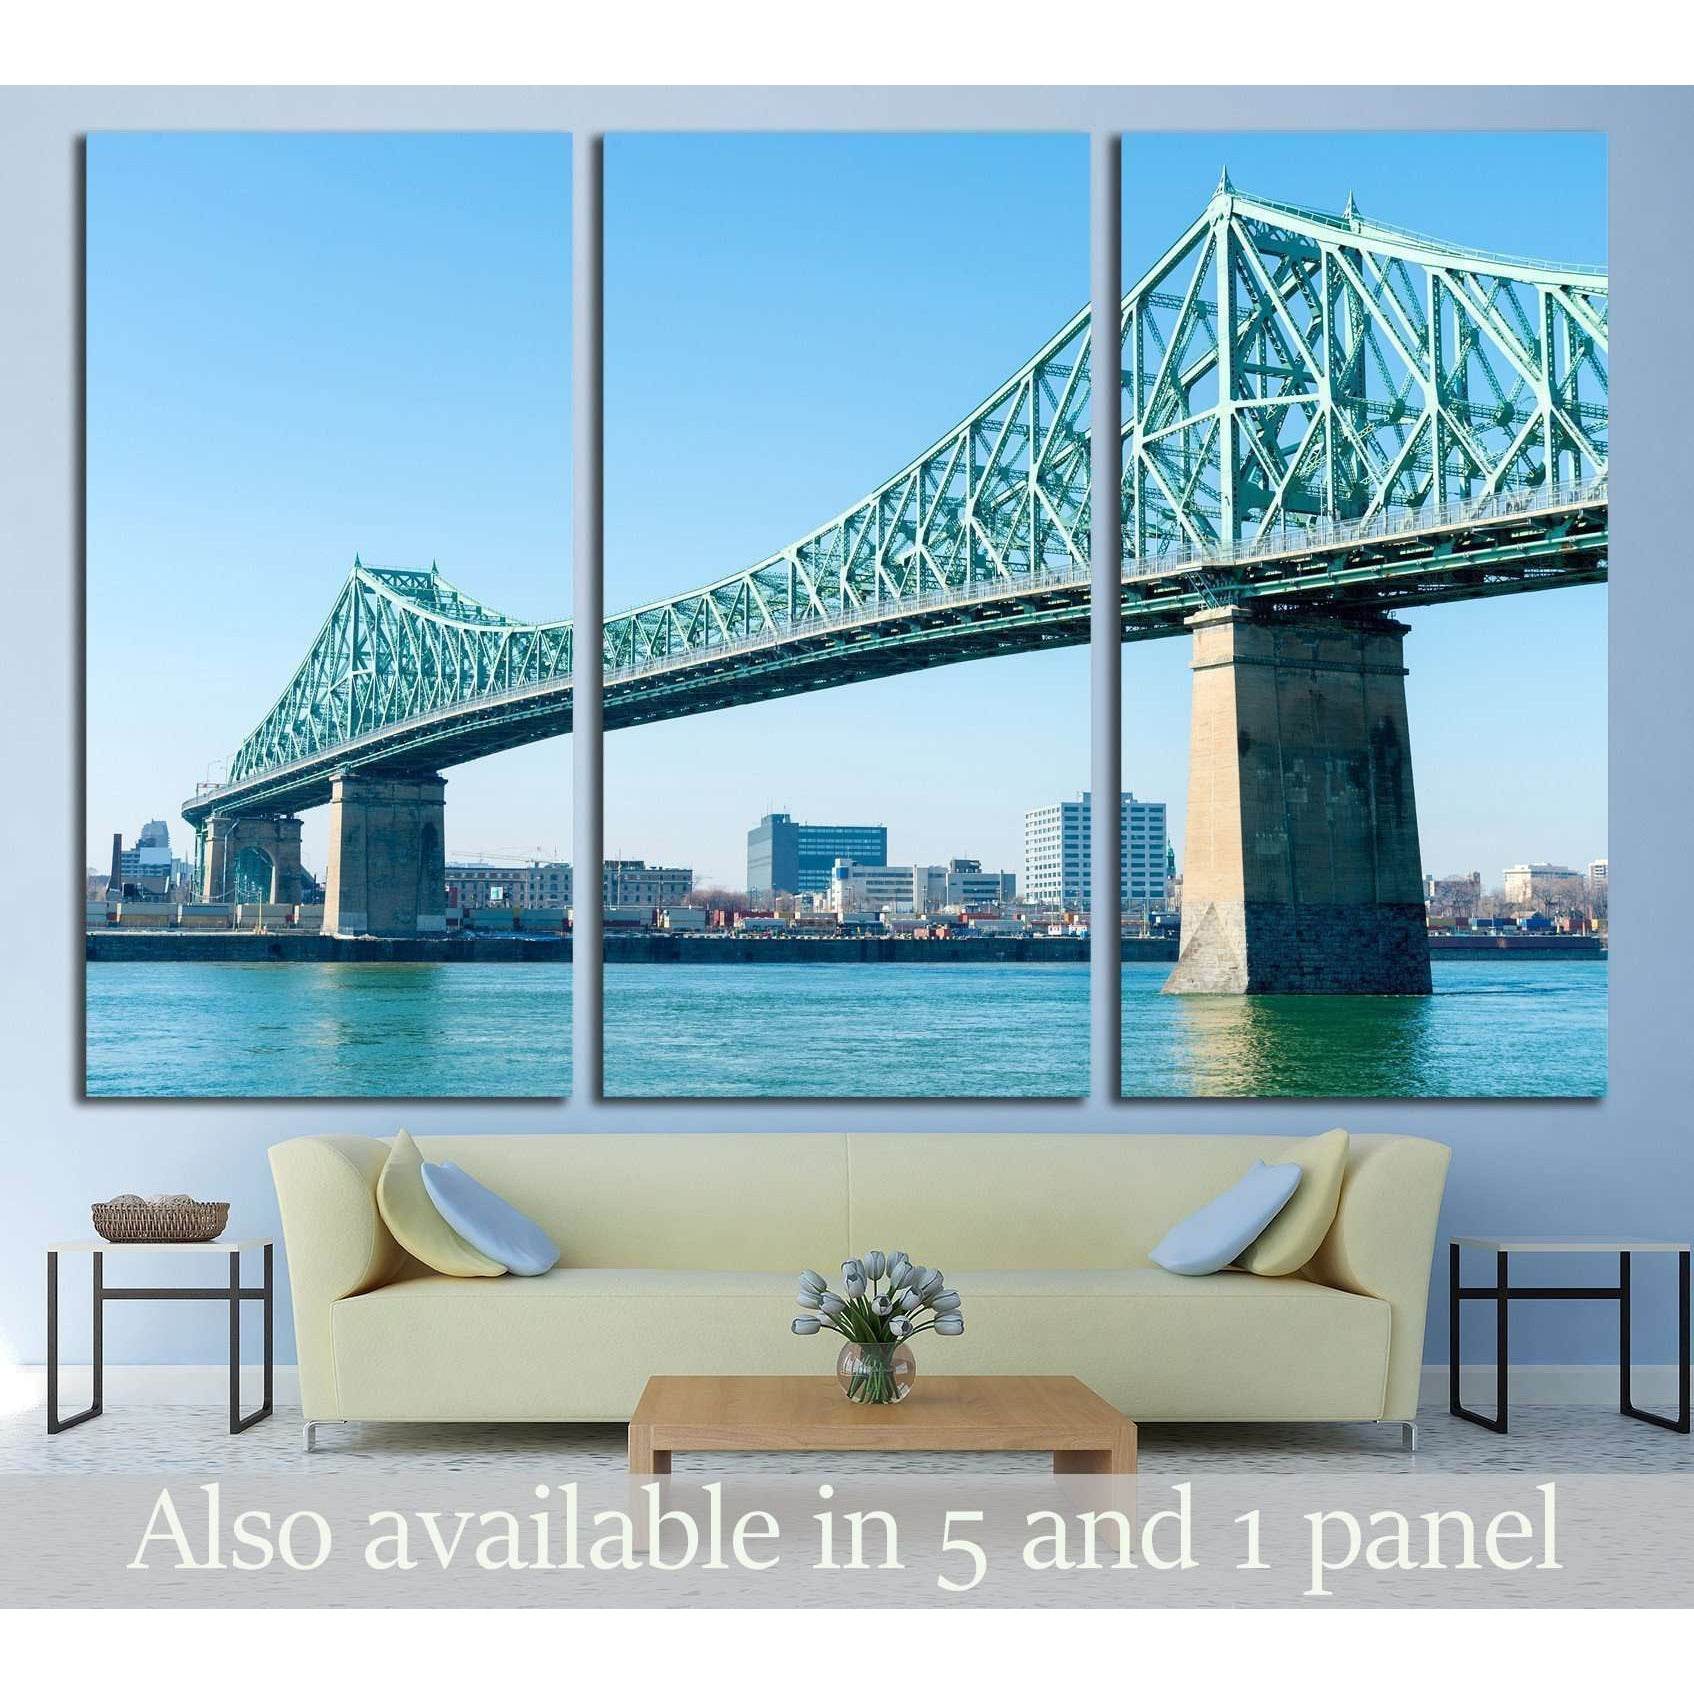 Jacques-Cartier Bridge in Montreal, at sunset №2016 Ready to Hang Canvas Print